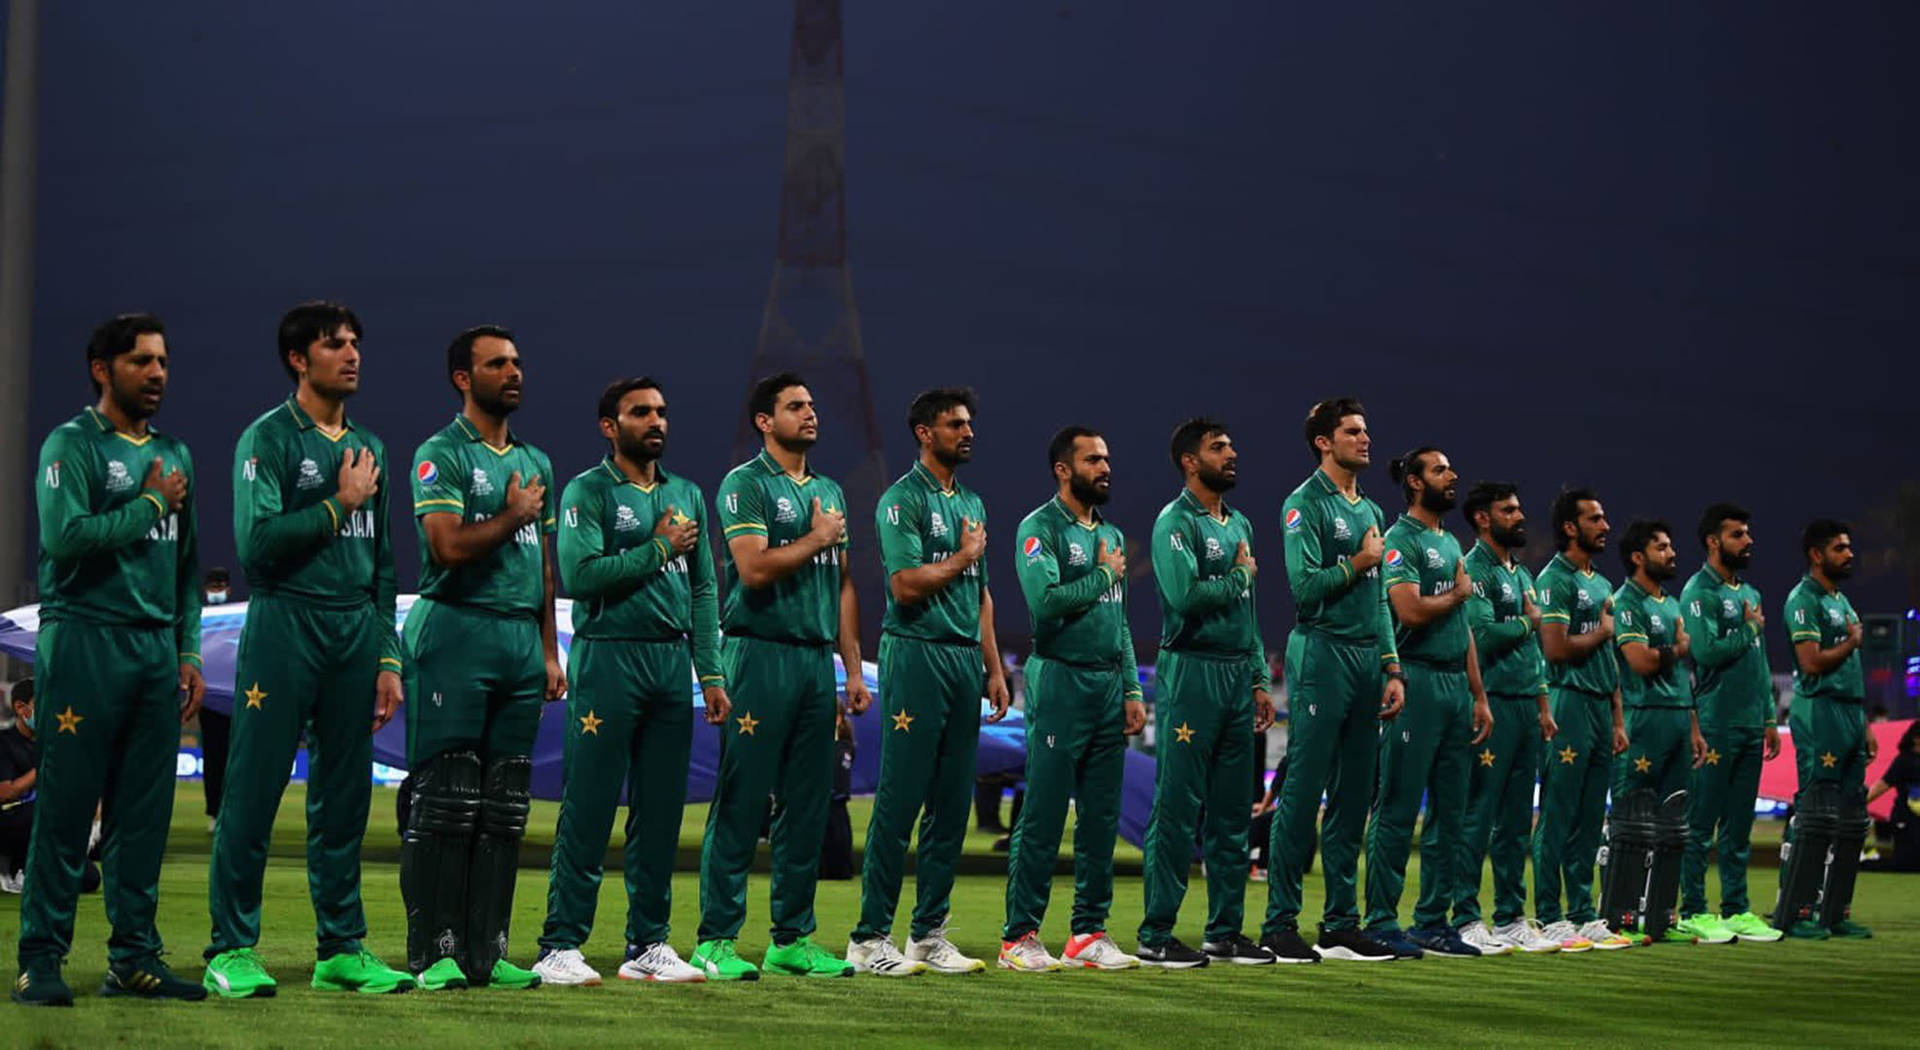 Pakistan Cricket Team Giving Salute During National Anthem Background